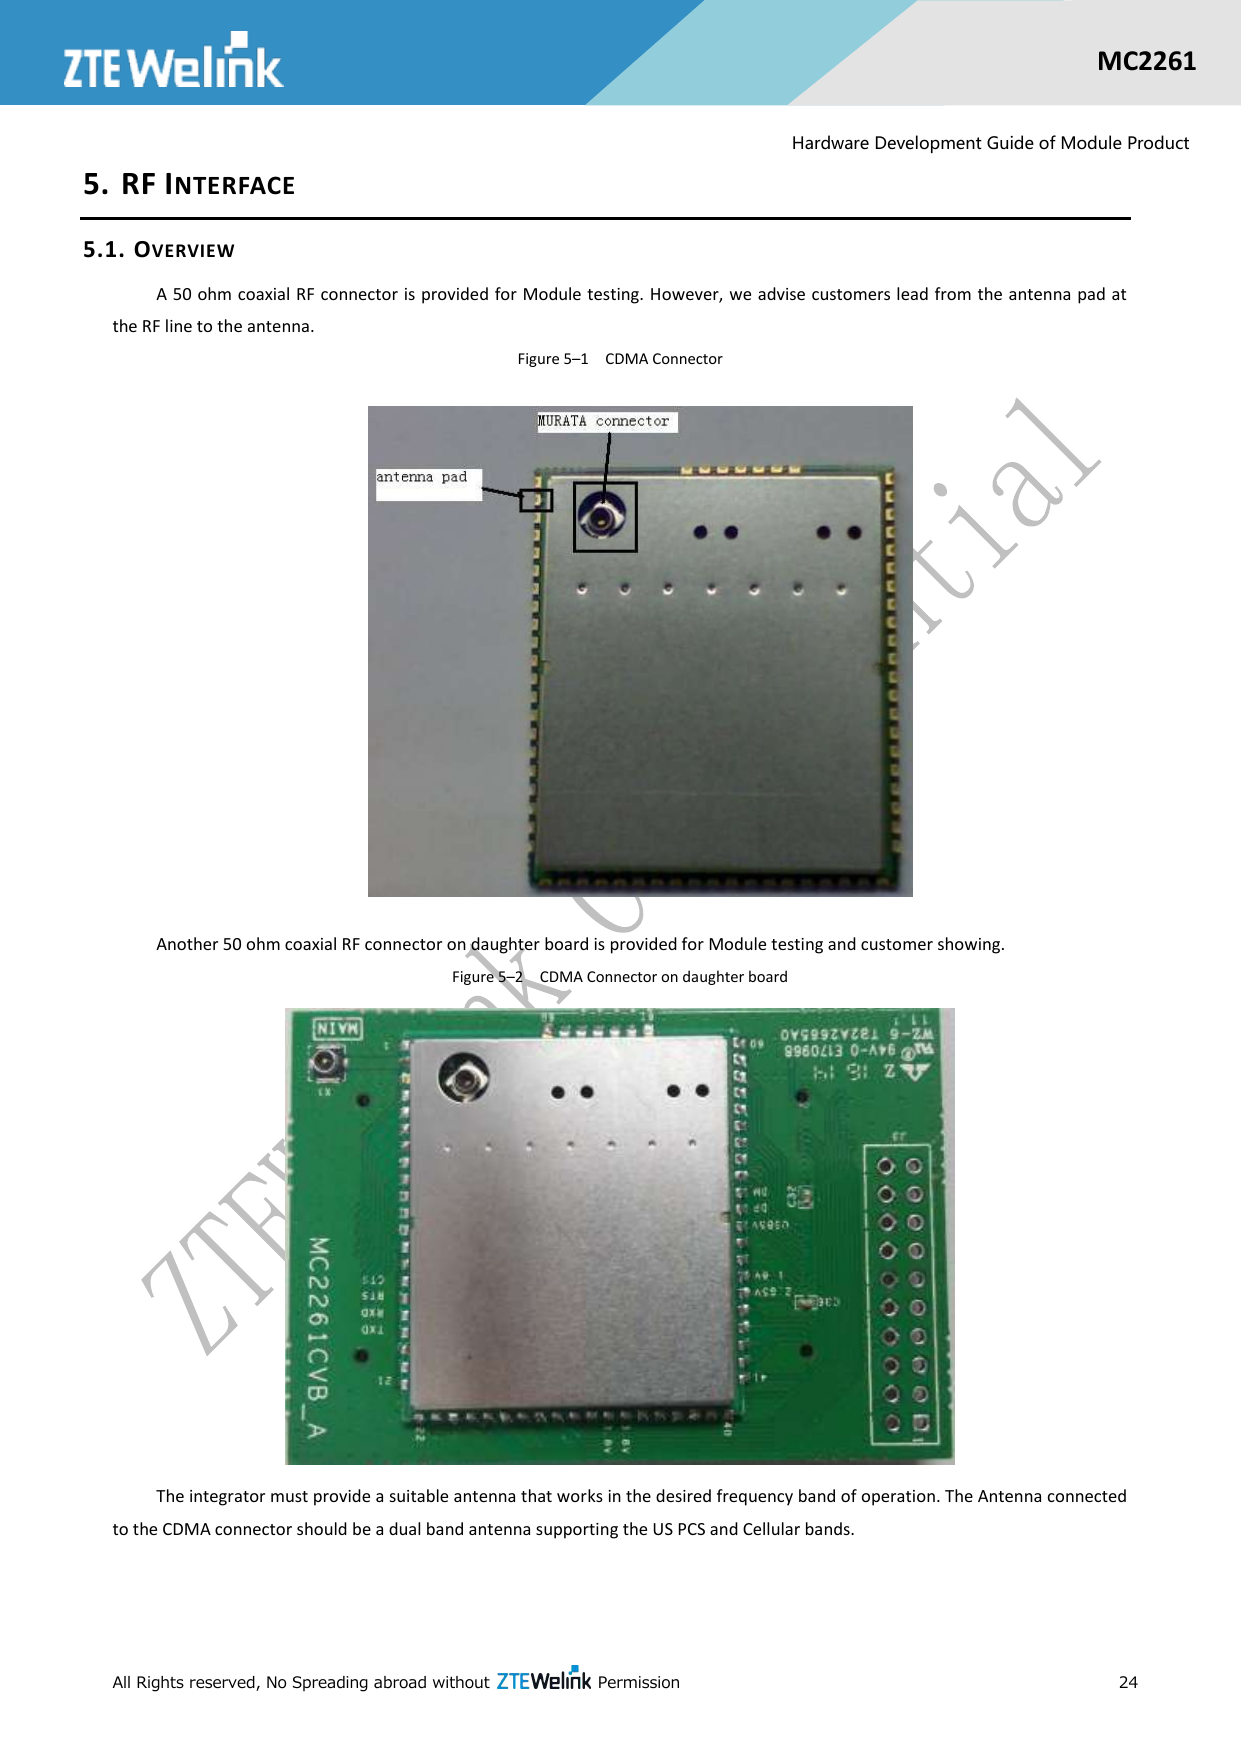  All Rights reserved, No Spreading abroad without    Permission      24  MC2261  Hardware Development Guide of Module Product 5. RF INTERFACE 5.1. OVERVIEW A 50 ohm coaxial RF connector is provided for Module testing. However, we advise customers lead from the antenna pad at the RF line to the antenna. Figure 5–1  CDMA Connector  Another 50 ohm coaxial RF connector on daughter board is provided for Module testing and customer showing. Figure 5–2  CDMA Connector on daughter board  The integrator must provide a suitable antenna that works in the desired frequency band of operation. The Antenna connected to the CDMA connector should be a dual band antenna supporting the US PCS and Cellular bands. 